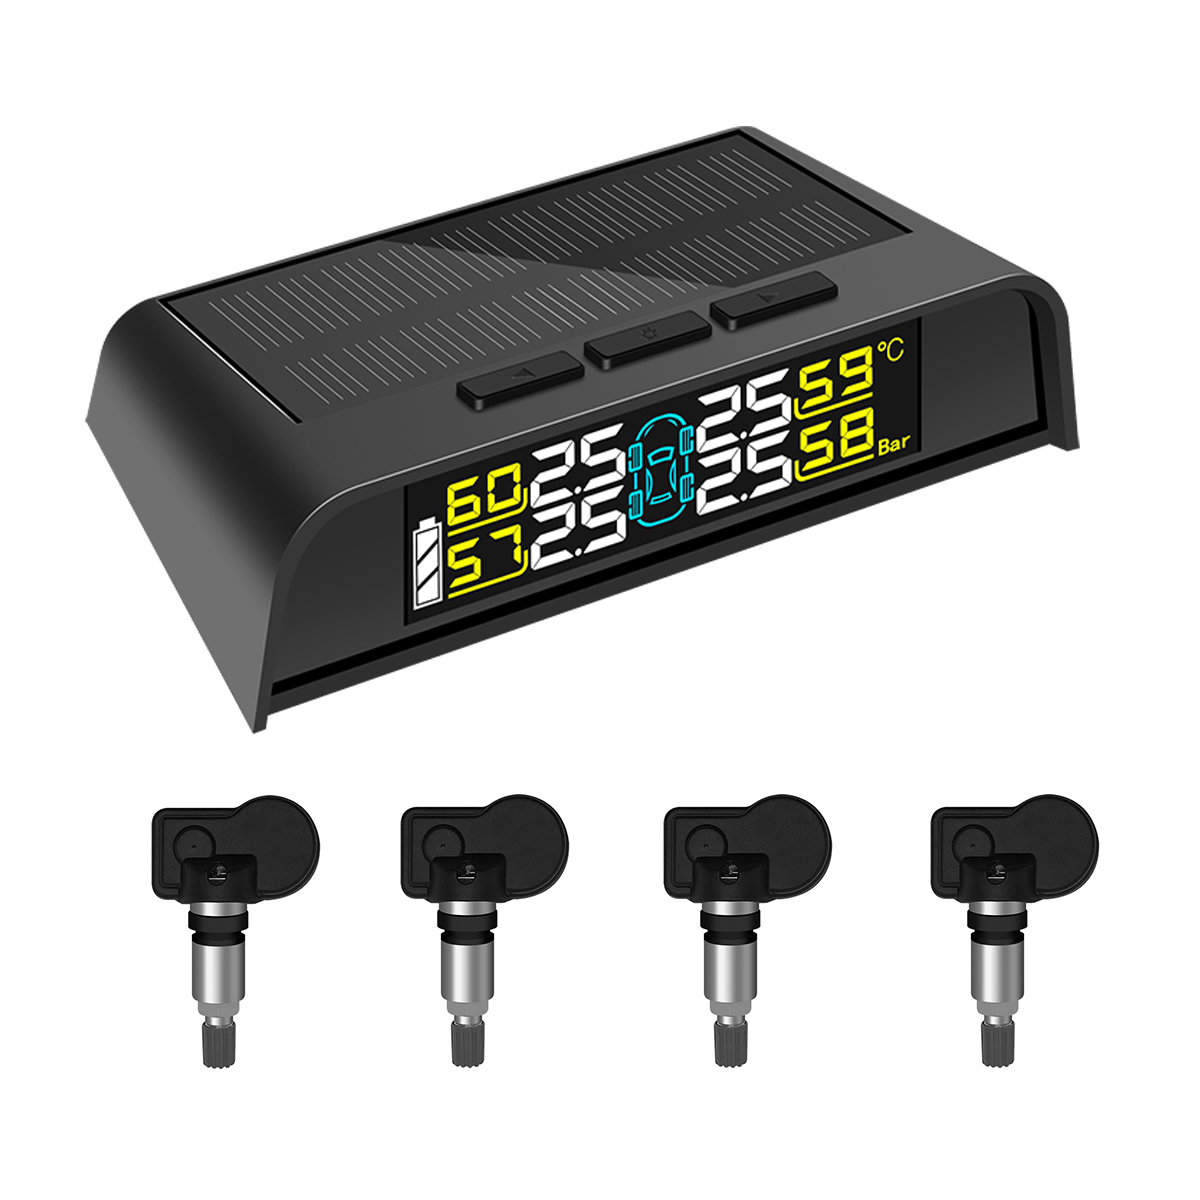 High-Quality OEM Tire Air Sensor Suppliers Quotes –  Wired TPMS For cars Tire pressure monitoring system with Japanese battery,stable performance  – Minpn